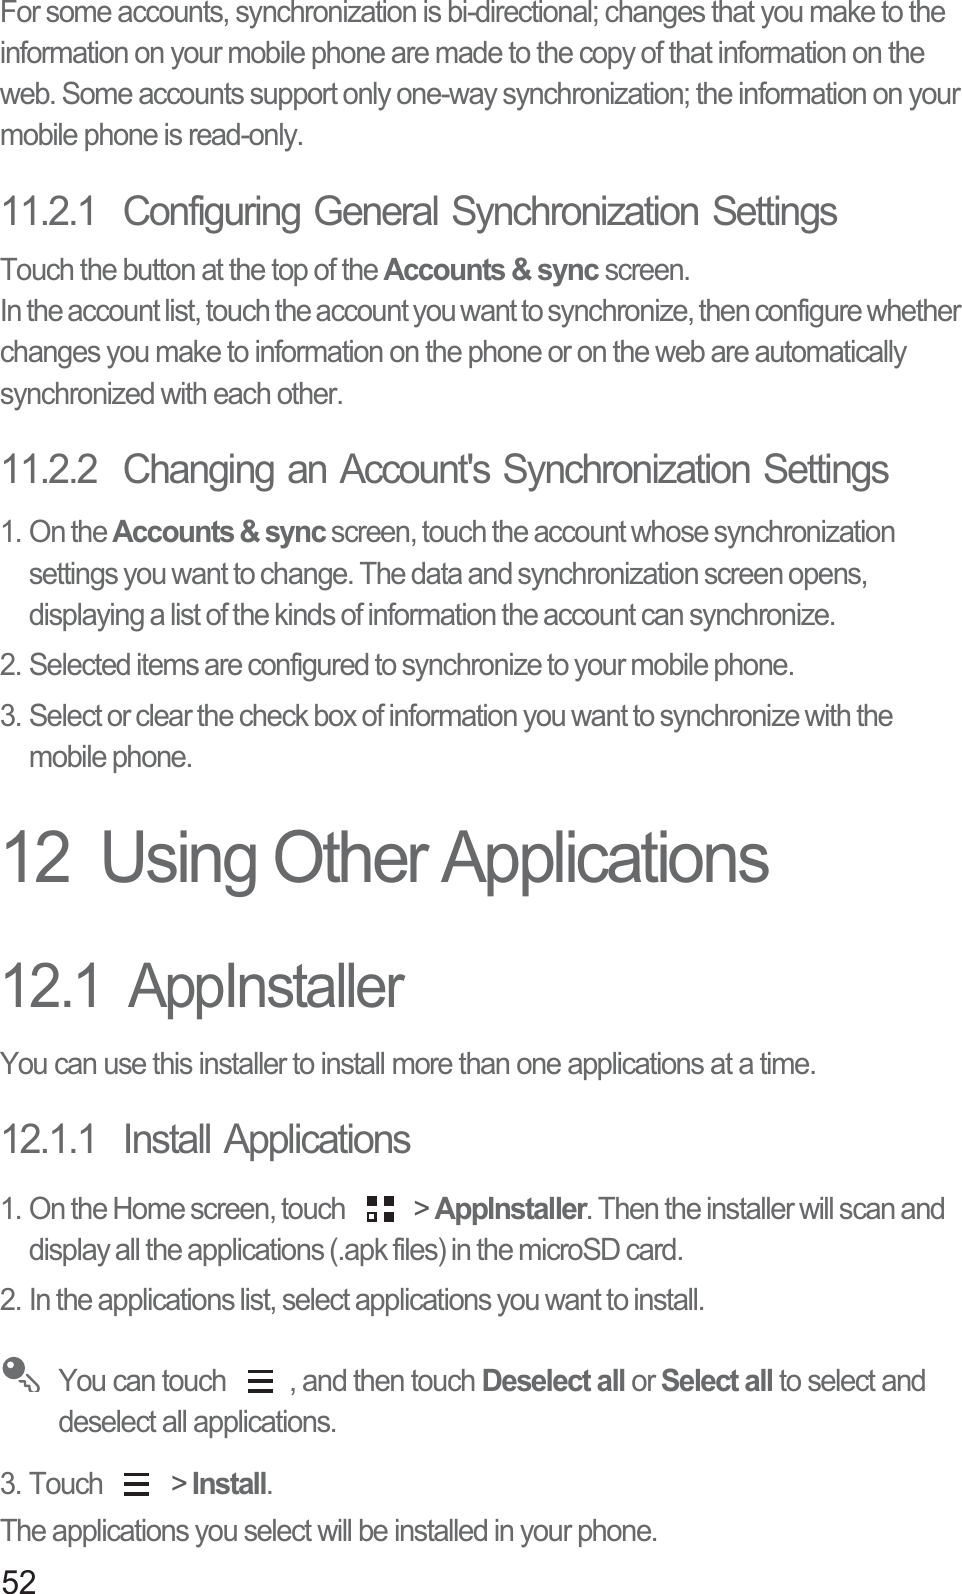 52For some accounts, synchronization is bi-directional; changes that you make to the information on your mobile phone are made to the copy of that information on the web. Some accounts support only one-way synchronization; the information on your mobile phone is read-only.11.2.1  Configuring General Synchronization SettingsTouch the button at the top of the Accounts &amp; sync screen. In the account list, touch the account you want to synchronize, then configure whether changes you make to information on the phone or on the web are automatically synchronized with each other.11.2.2  Changing an Account&apos;s Synchronization Settings1. On the Accounts &amp; sync screen, touch the account whose synchronization settings you want to change. The data and synchronization screen opens, displaying a list of the kinds of information the account can synchronize.2. Selected items are configured to synchronize to your mobile phone.3. Select or clear the check box of information you want to synchronize with the mobile phone.12  Using Other Applications12.1  AppInstallerYou can use this installer to install more than one applications at a time.12.1.1  Install Applications1. On the Home screen, touch   &gt; AppInstaller. Then the installer will scan and display all the applications (.apk files) in the microSD card.2. In the applications list, select applications you want to install. You can touch  , and then touch Deselect all or Select all to select and deselect all applications.3. Touch   &gt; Install.The applications you select will be installed in your phone.